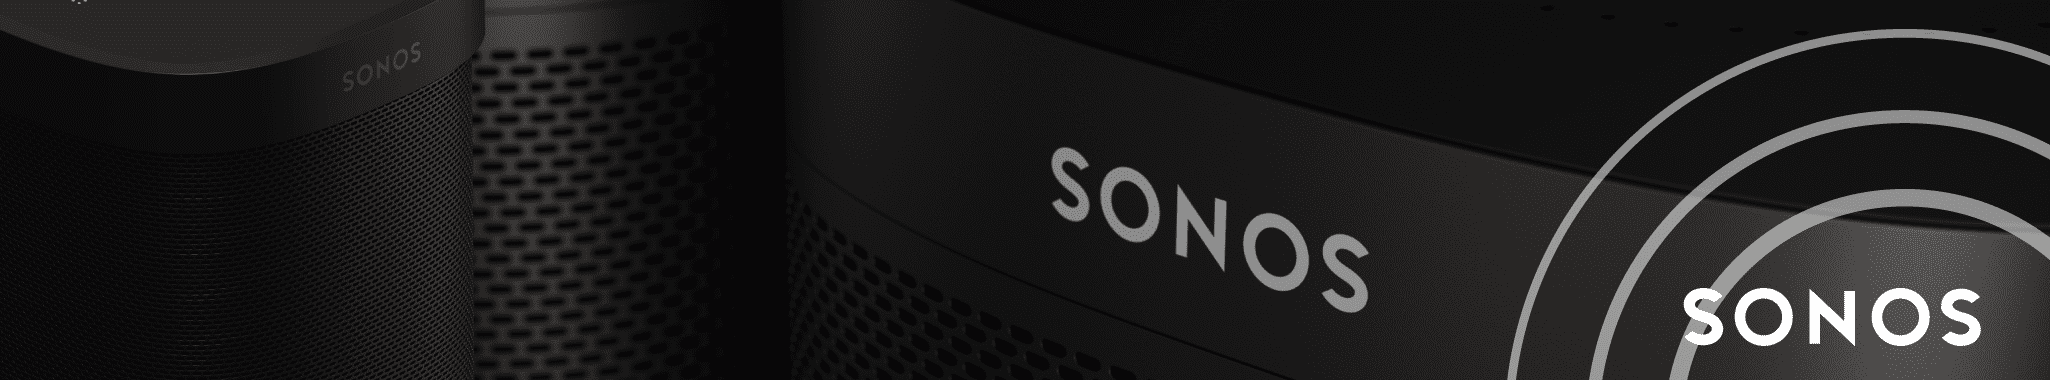 Refer A Friend to get your hands on a free sonos speaker